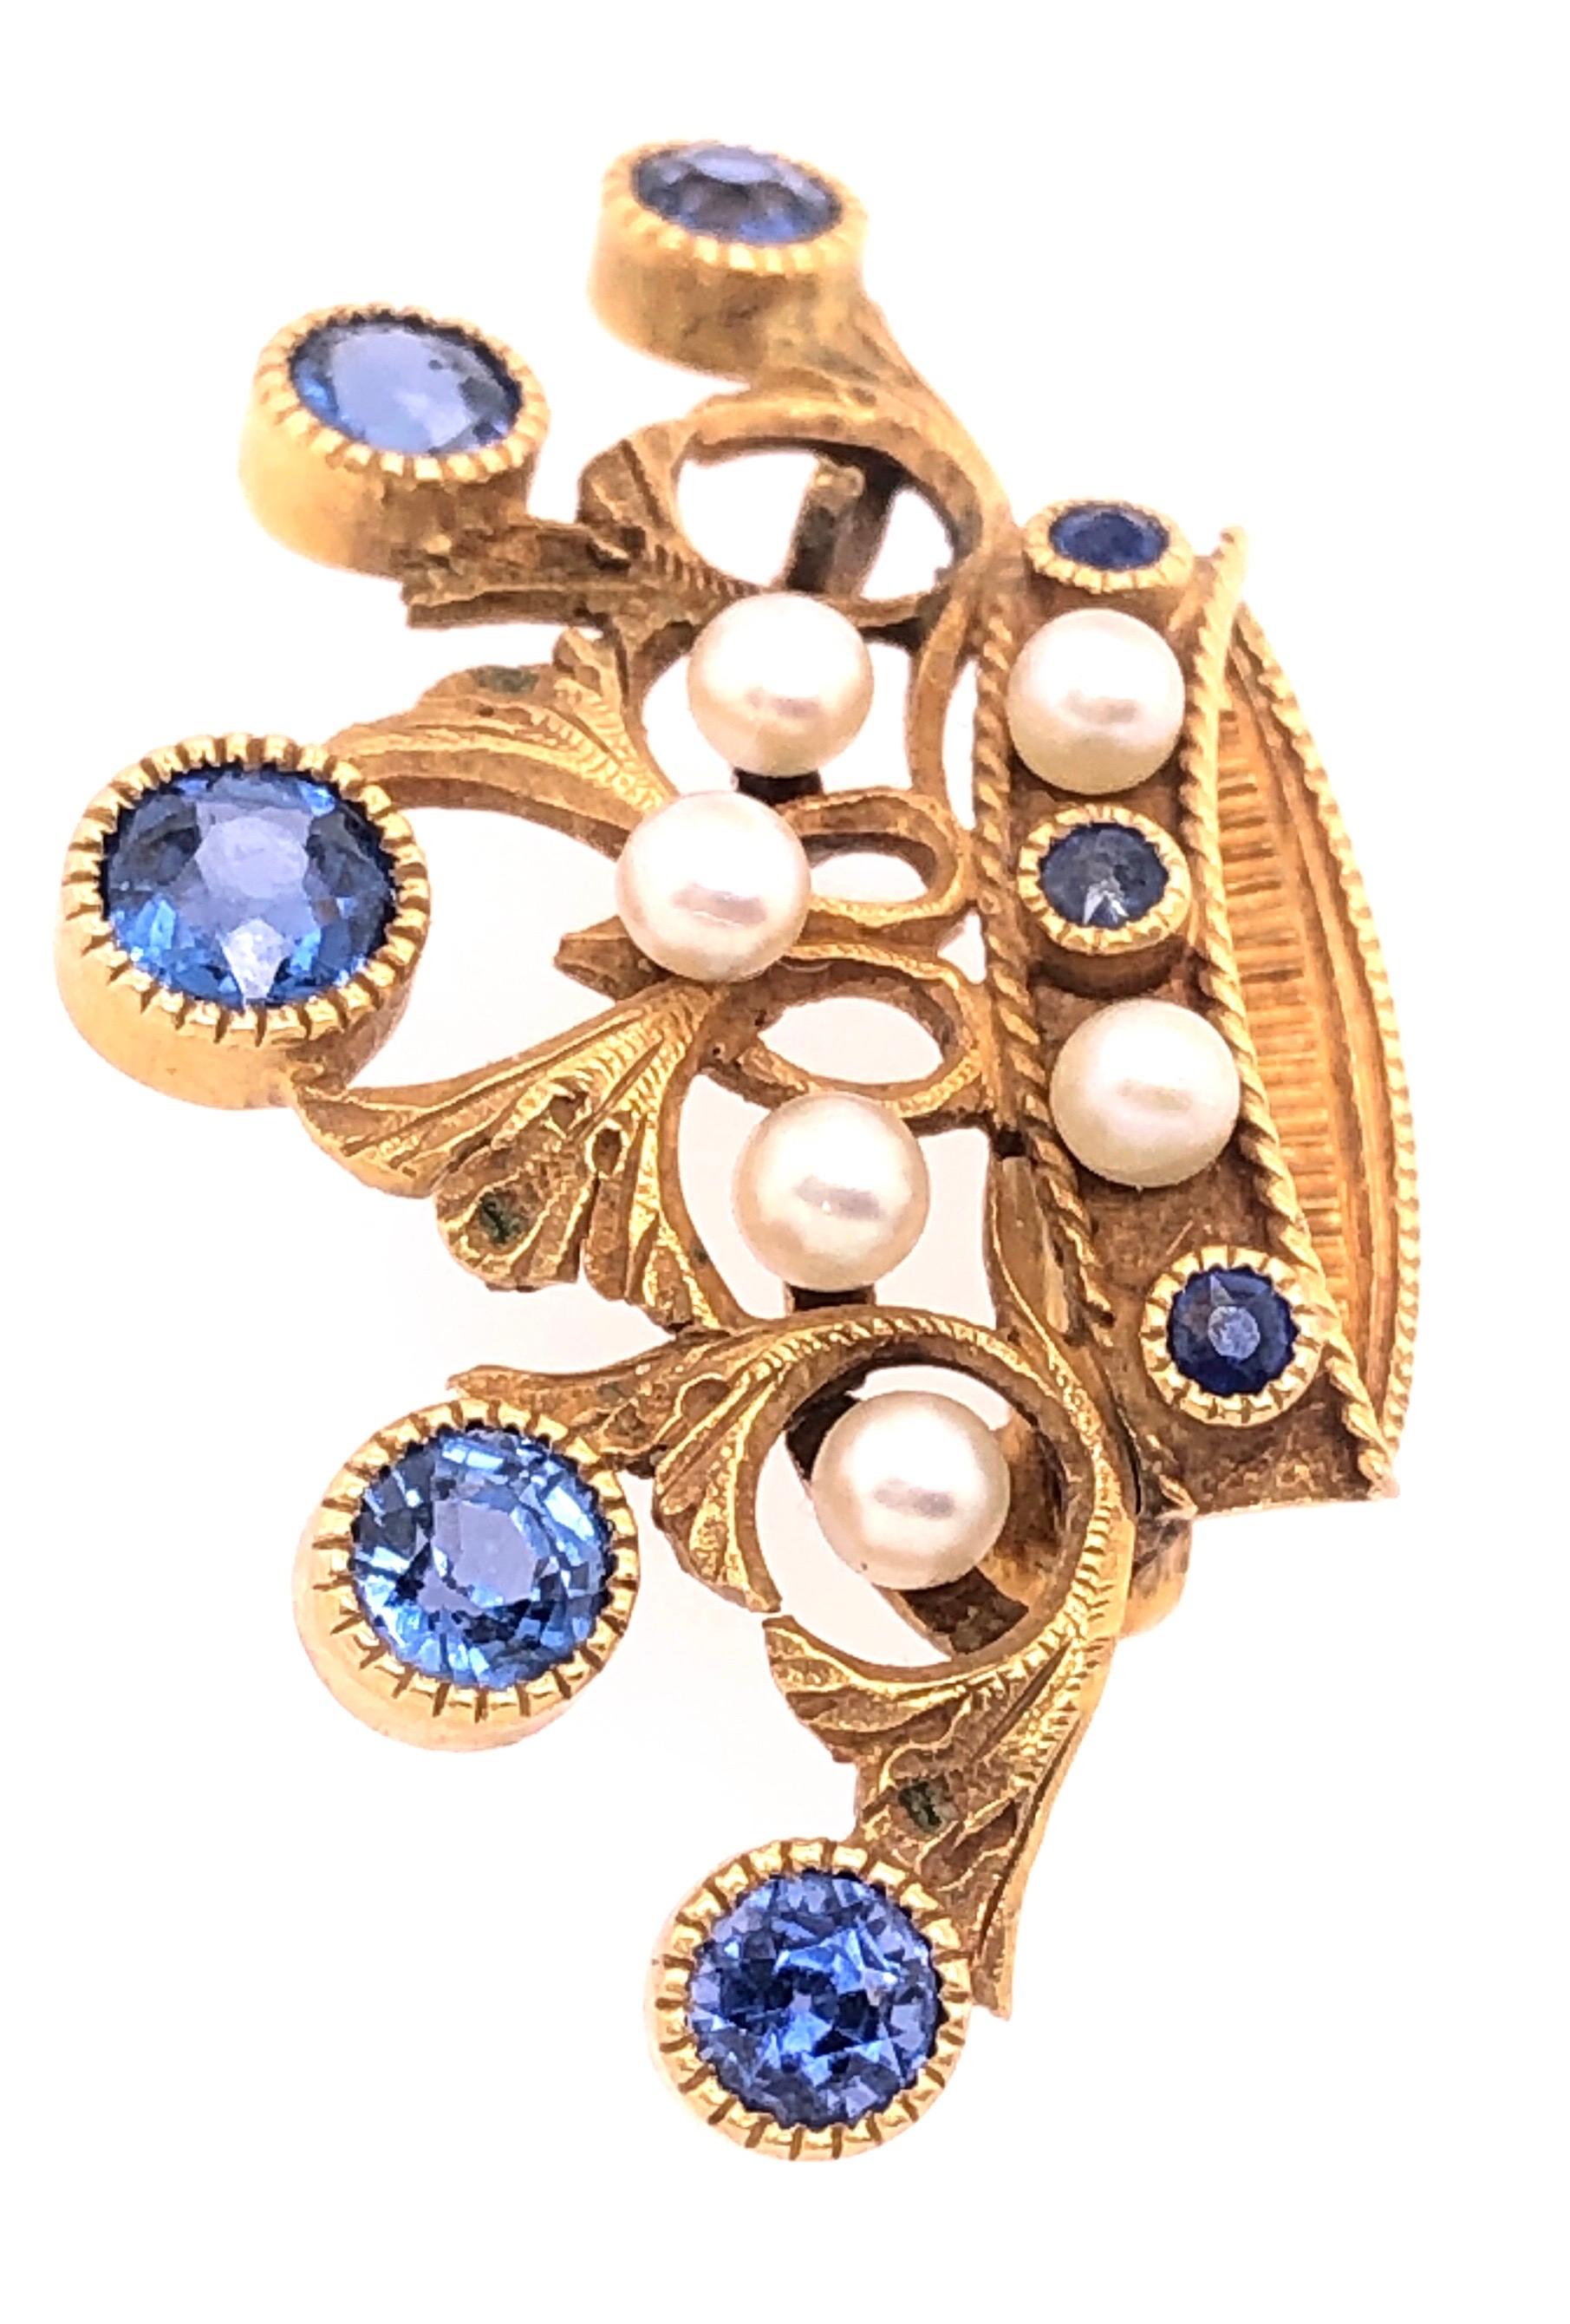 14Kt Yellow Gold Tiara Crown Pin or Brooch with Stones and Pearls. 19.25 by 33.5 mm in width. Pearls approx 3mm in diameter. Larger Sapphire is 5mm. Bearing unknown makers hallmark. 
